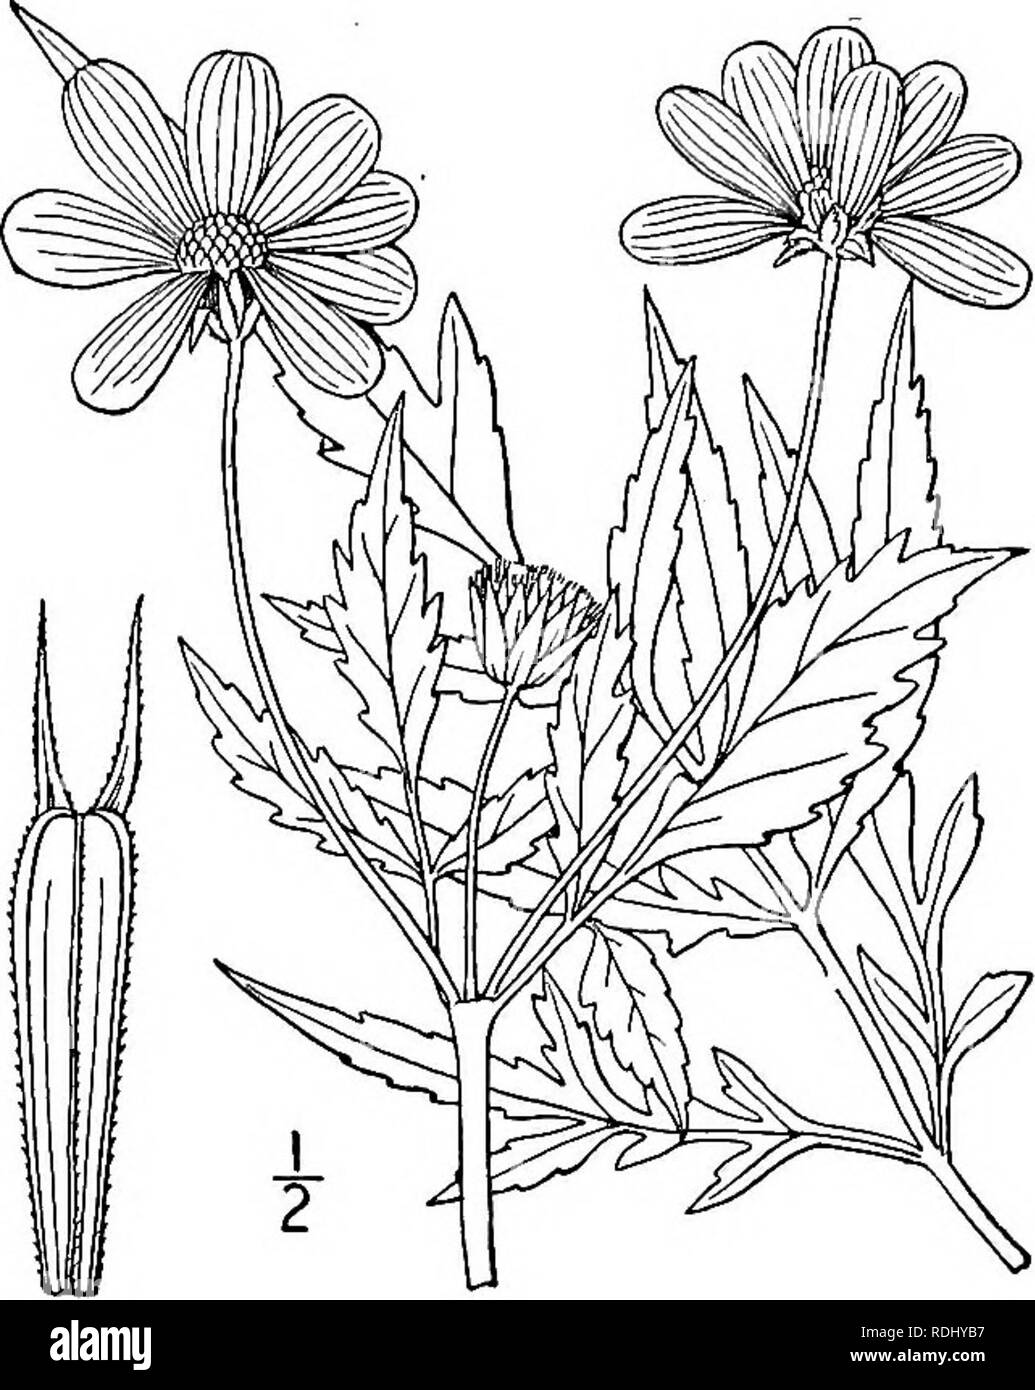 . An illustrated flora of the northern United States, Canada and the British possessions, from Newfoundland to the parallel of the southern boundary of Virginia, and from the Atlantic Ocean westward to the 102d meridian. Botany; Botany. Genus 71. THISTLE FAMILY. 499 12. Bidens aristdsa (Michx.) Britton. Western Tickseed-Sunflower. Fig. 4516. Coreopsis aristosa Michx. Fl. Bor. Am. 2: 140. 1803. C. aristata Muhl.; Willd. Sp. PI. 3: 2253. 1804. B. aristosa Britton, Bull. Torr. Club 20: 281. 1893. Annual or biennial; stem much branched, i°-3° high. Leaves thin, slender-petioled, pubescent beneath, Stock Photo